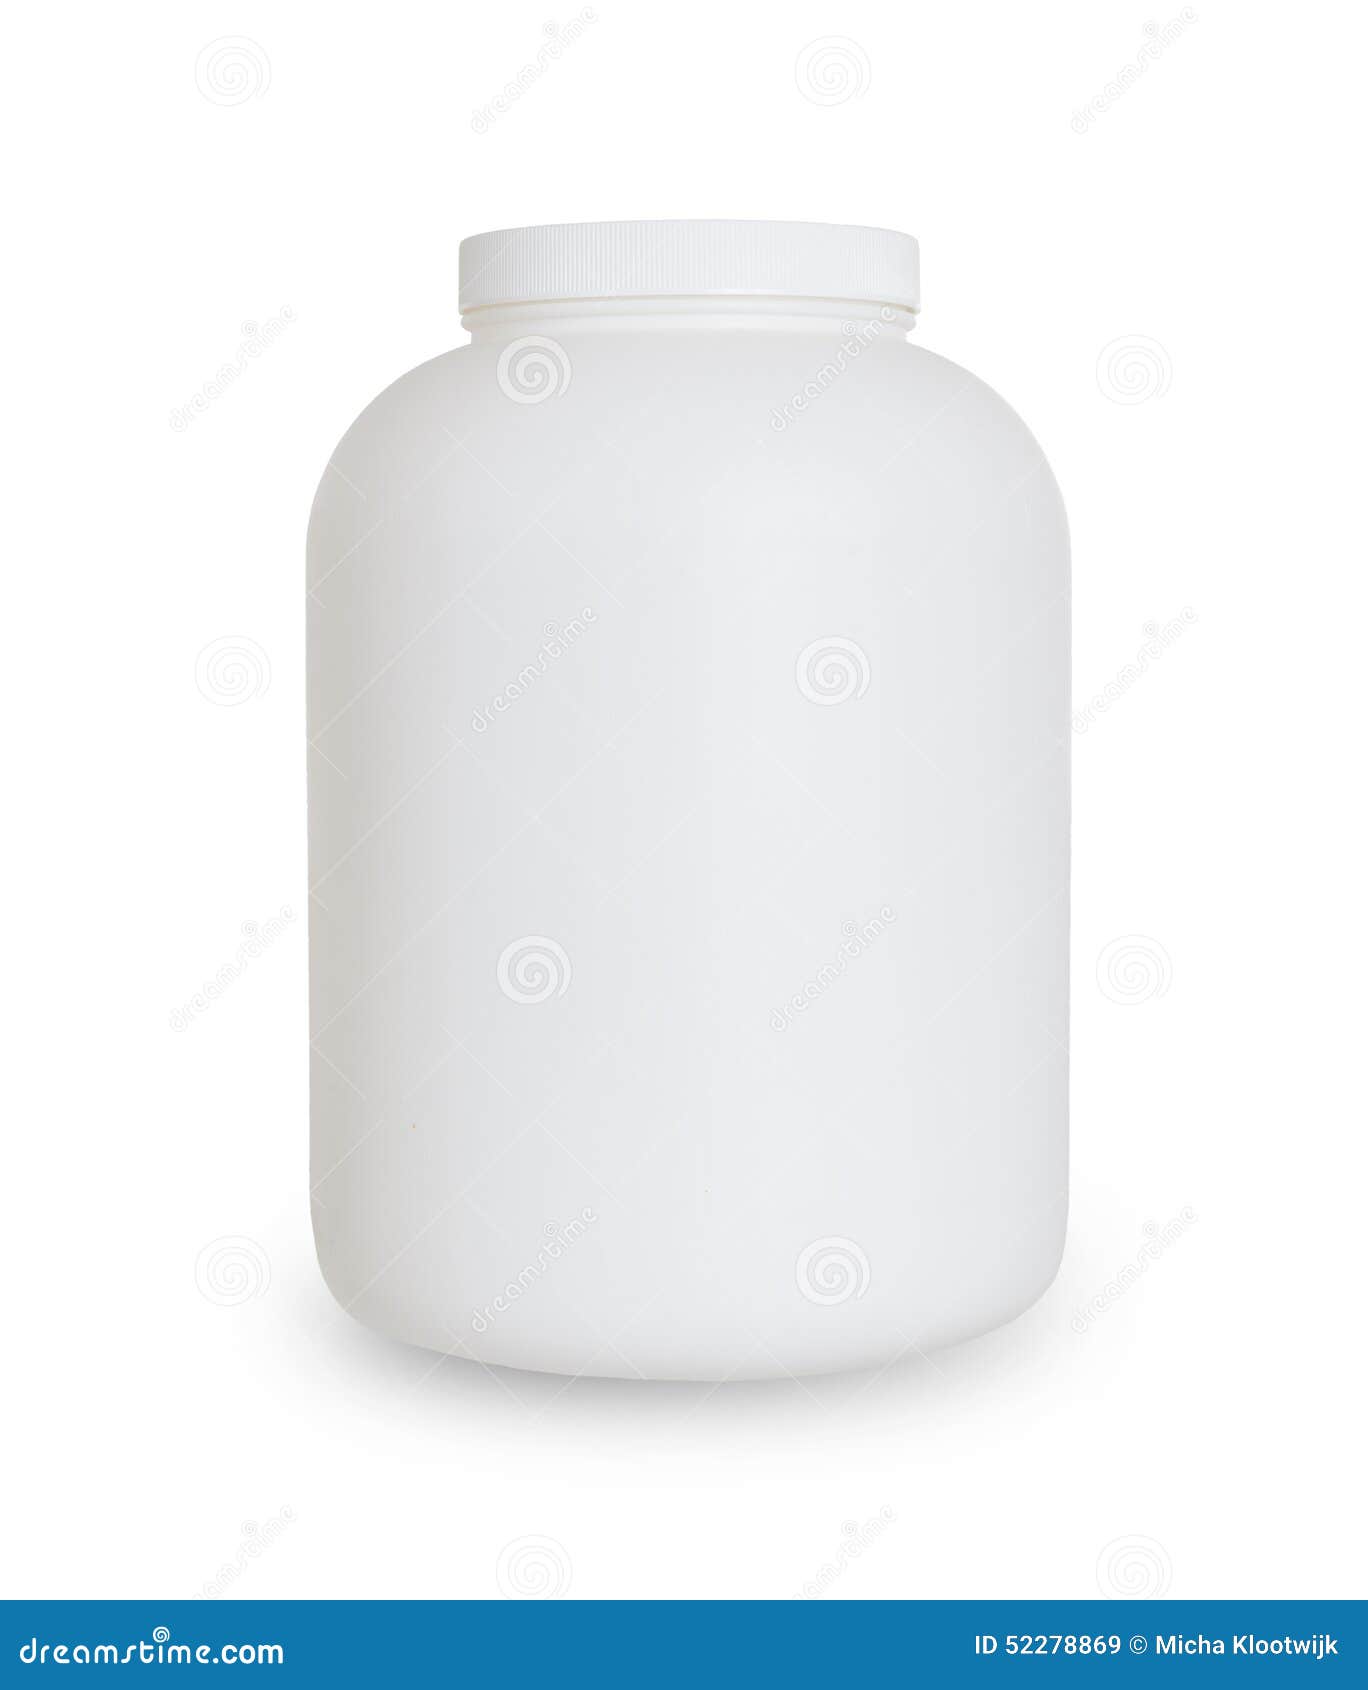 https://thumbs.dreamstime.com/z/empty-protein-powder-container-isolated-white-52278869.jpg